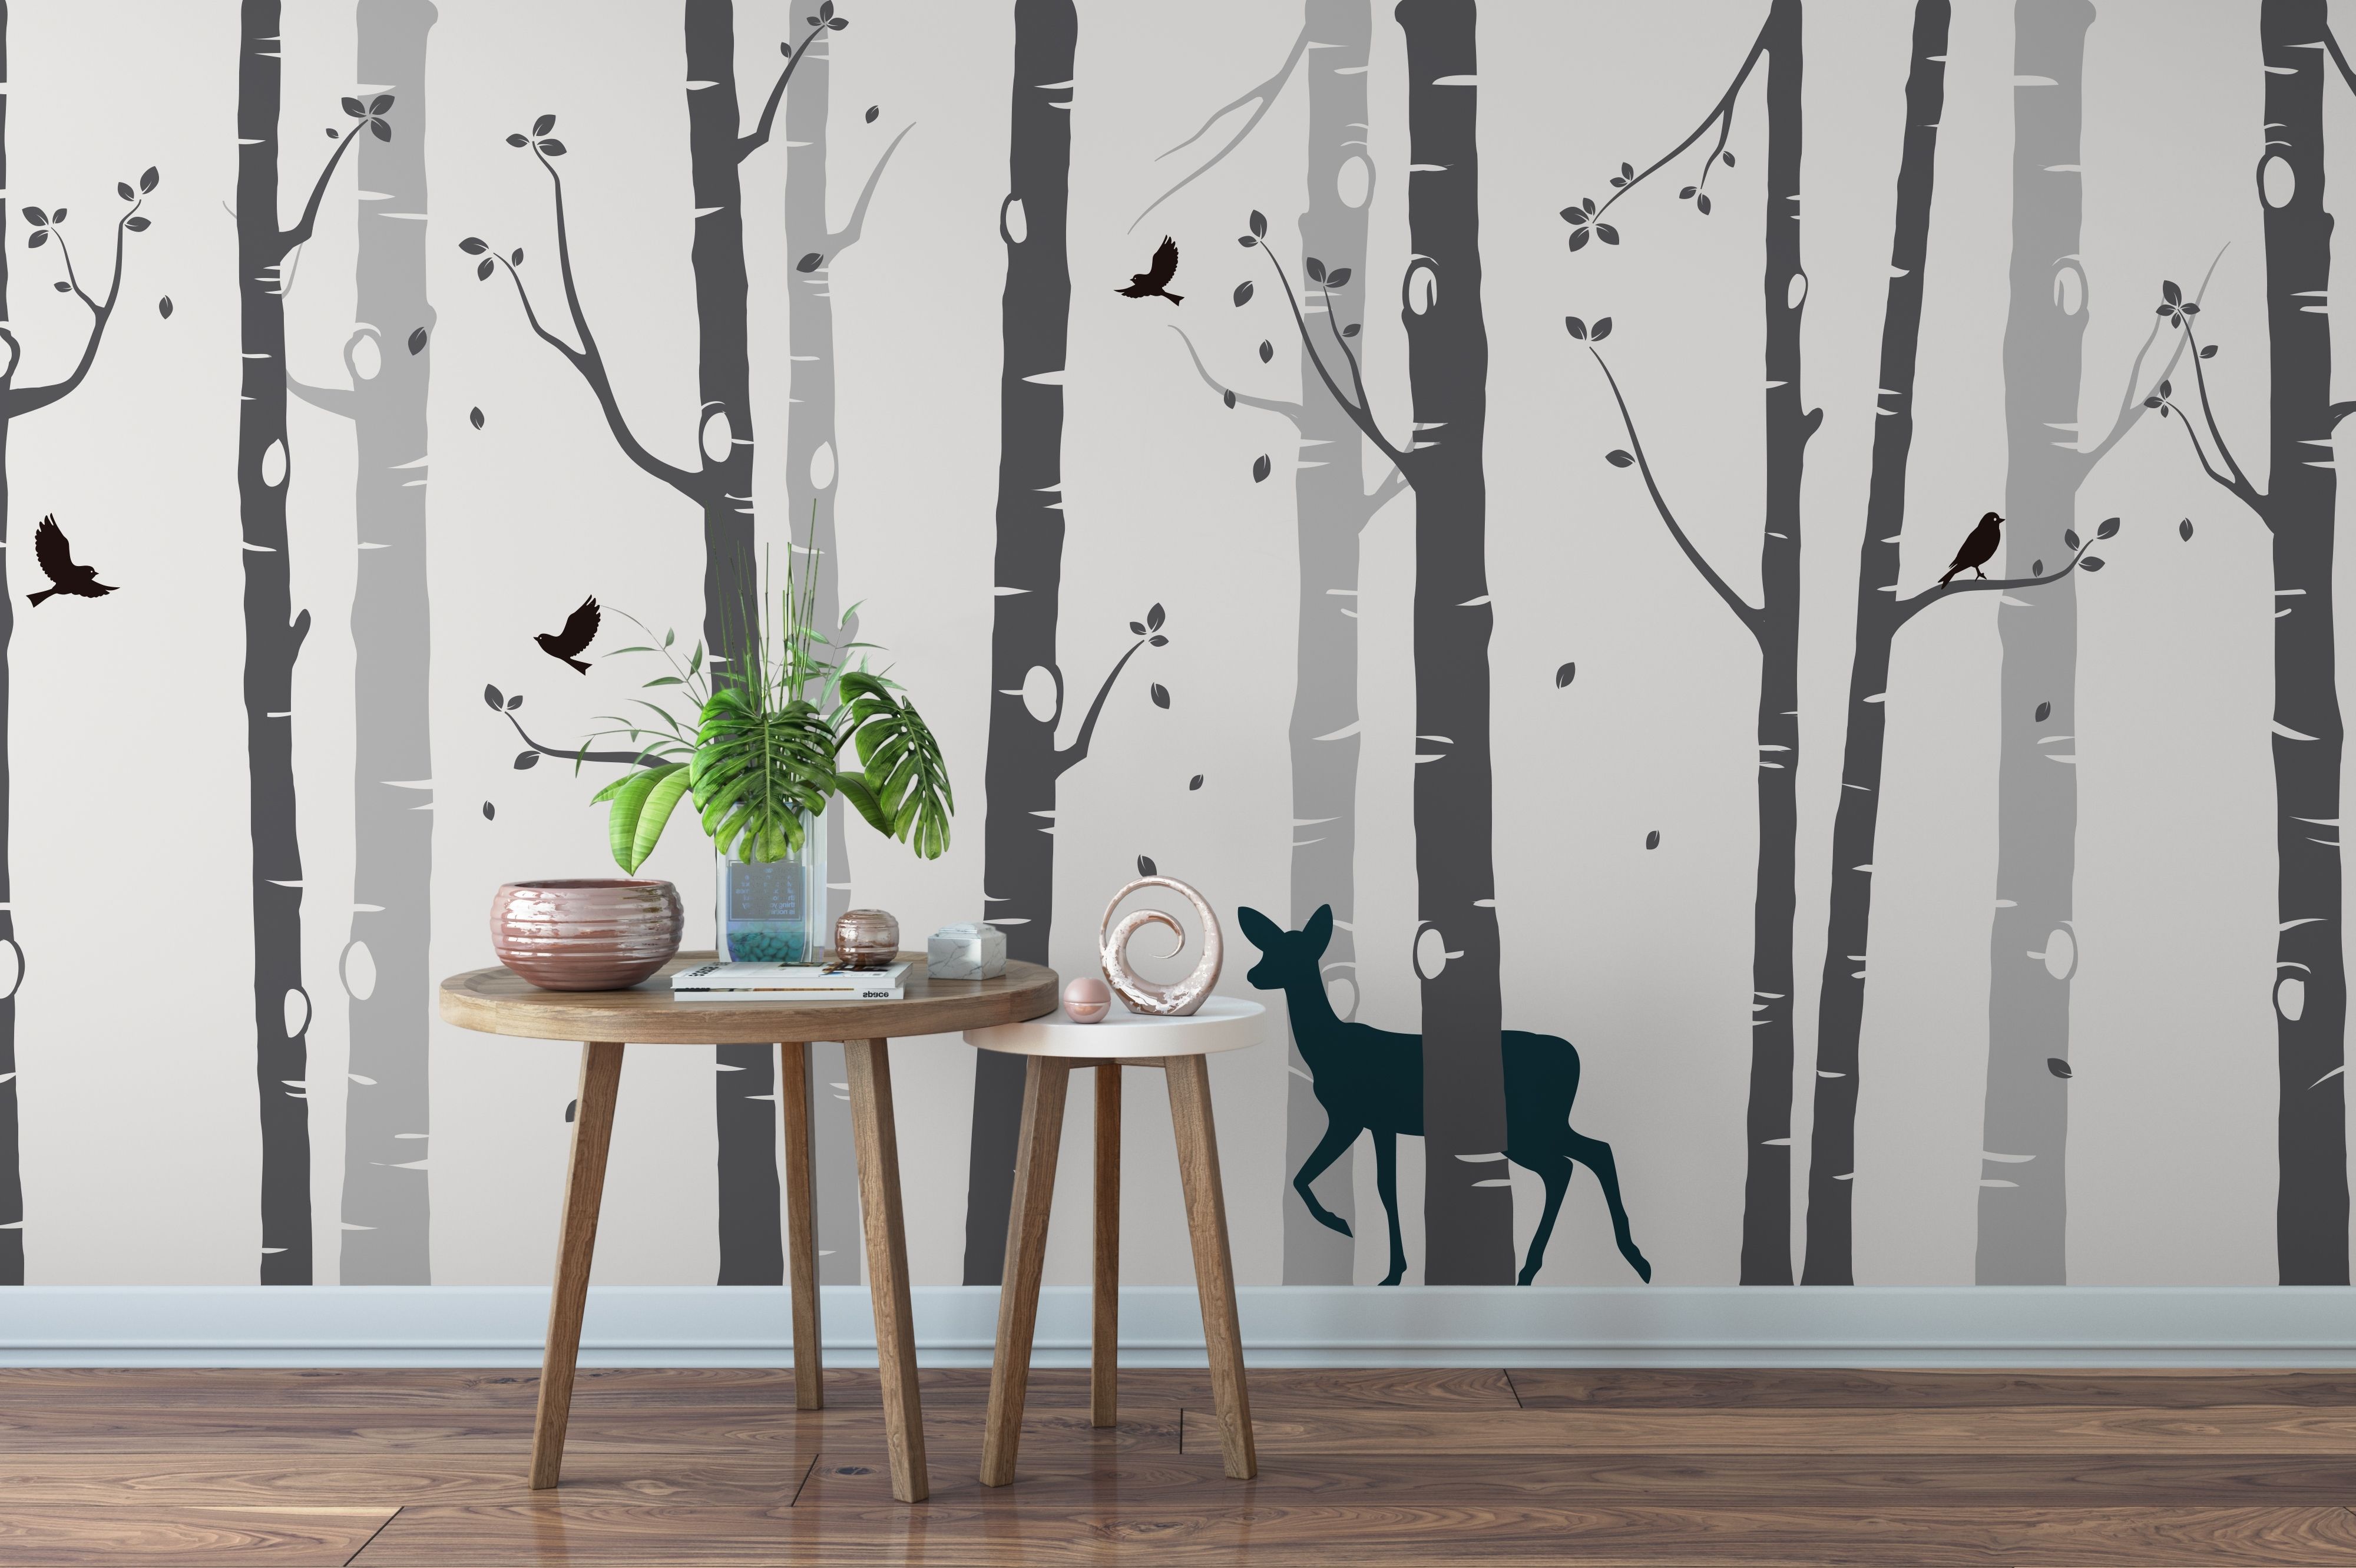 Fashionable Birch Tree Wall Art Intended For Tree Wall Art Archives (View 19 of 20)